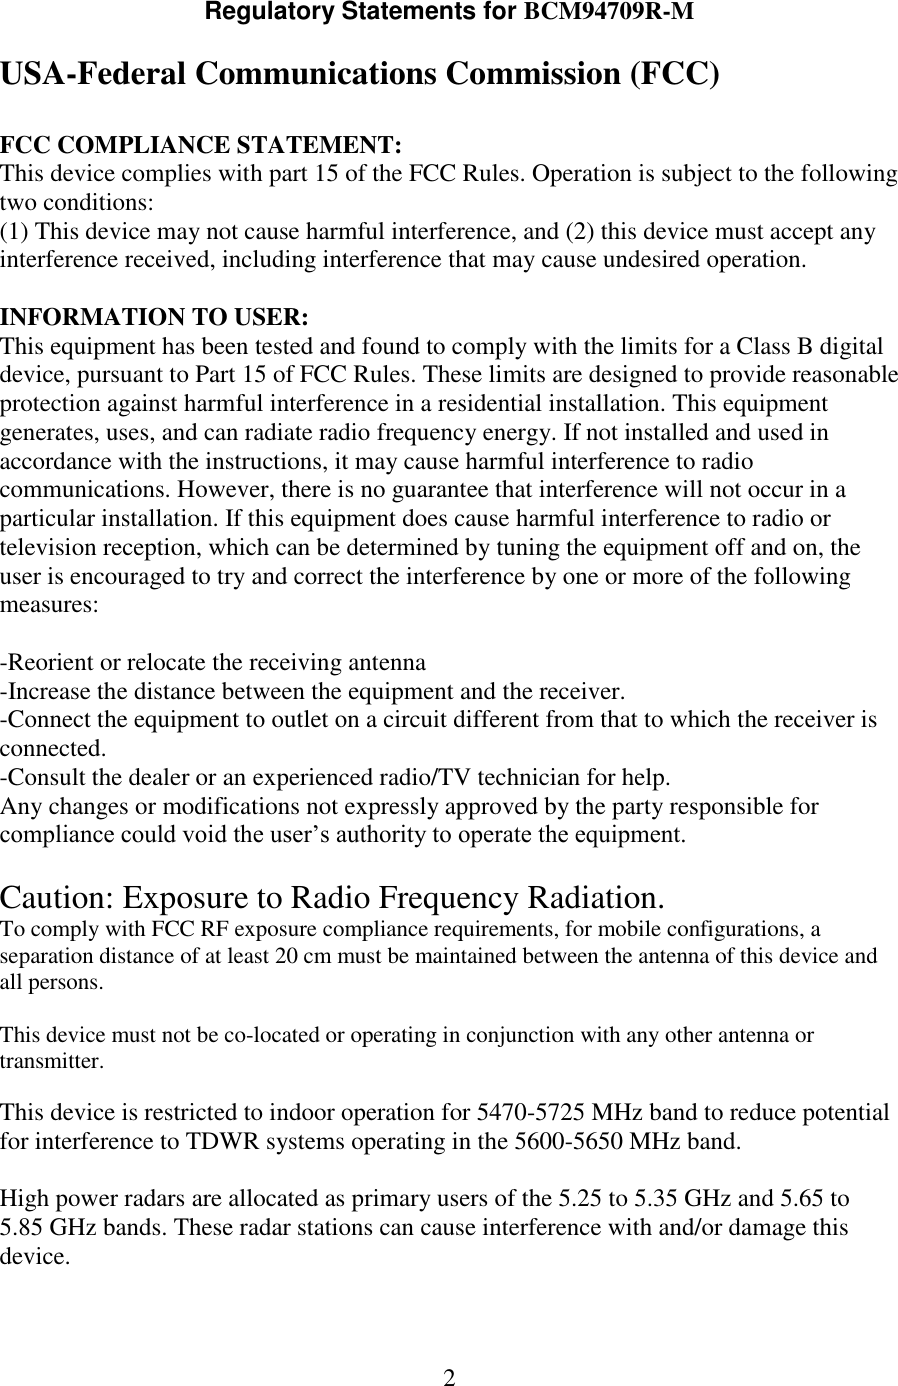 2  Regulatory Statements for BCM94709R-M  USA-Federal Communications Commission (FCC)  FCC COMPLIANCE STATEMENT: This device complies with part 15 of the FCC Rules. Operation is subject to the following two conditions: (1) This device may not cause harmful interference, and (2) this device must accept any interference received, including interference that may cause undesired operation.  INFORMATION TO USER: This equipment has been tested and found to comply with the limits for a Class B digital device, pursuant to Part 15 of FCC Rules. These limits are designed to provide reasonable protection against harmful interference in a residential installation. This equipment generates, uses, and can radiate radio frequency energy. If not installed and used in accordance with the instructions, it may cause harmful interference to radio communications. However, there is no guarantee that interference will not occur in a particular installation. If this equipment does cause harmful interference to radio or television reception, which can be determined by tuning the equipment off and on, the user is encouraged to try and correct the interference by one or more of the following measures:  -Reorient or relocate the receiving antenna -Increase the distance between the equipment and the receiver. -Connect the equipment to outlet on a circuit different from that to which the receiver is connected. -Consult the dealer or an experienced radio/TV technician for help. Any changes or modifications not expressly approved by the party responsible for compliance could void the user’s authority to operate the equipment.  Caution: Exposure to Radio Frequency Radiation. To comply with FCC RF exposure compliance requirements, for mobile configurations, a separation distance of at least 20 cm must be maintained between the antenna of this device and all persons.  This device must not be co-located or operating in conjunction with any other antenna or transmitter.  This device is restricted to indoor operation for 5470-5725 MHz band to reduce potential for interference to TDWR systems operating in the 5600-5650 MHz band.   High power radars are allocated as primary users of the 5.25 to 5.35 GHz and 5.65 to 5.85 GHz bands. These radar stations can cause interference with and/or damage this device.    